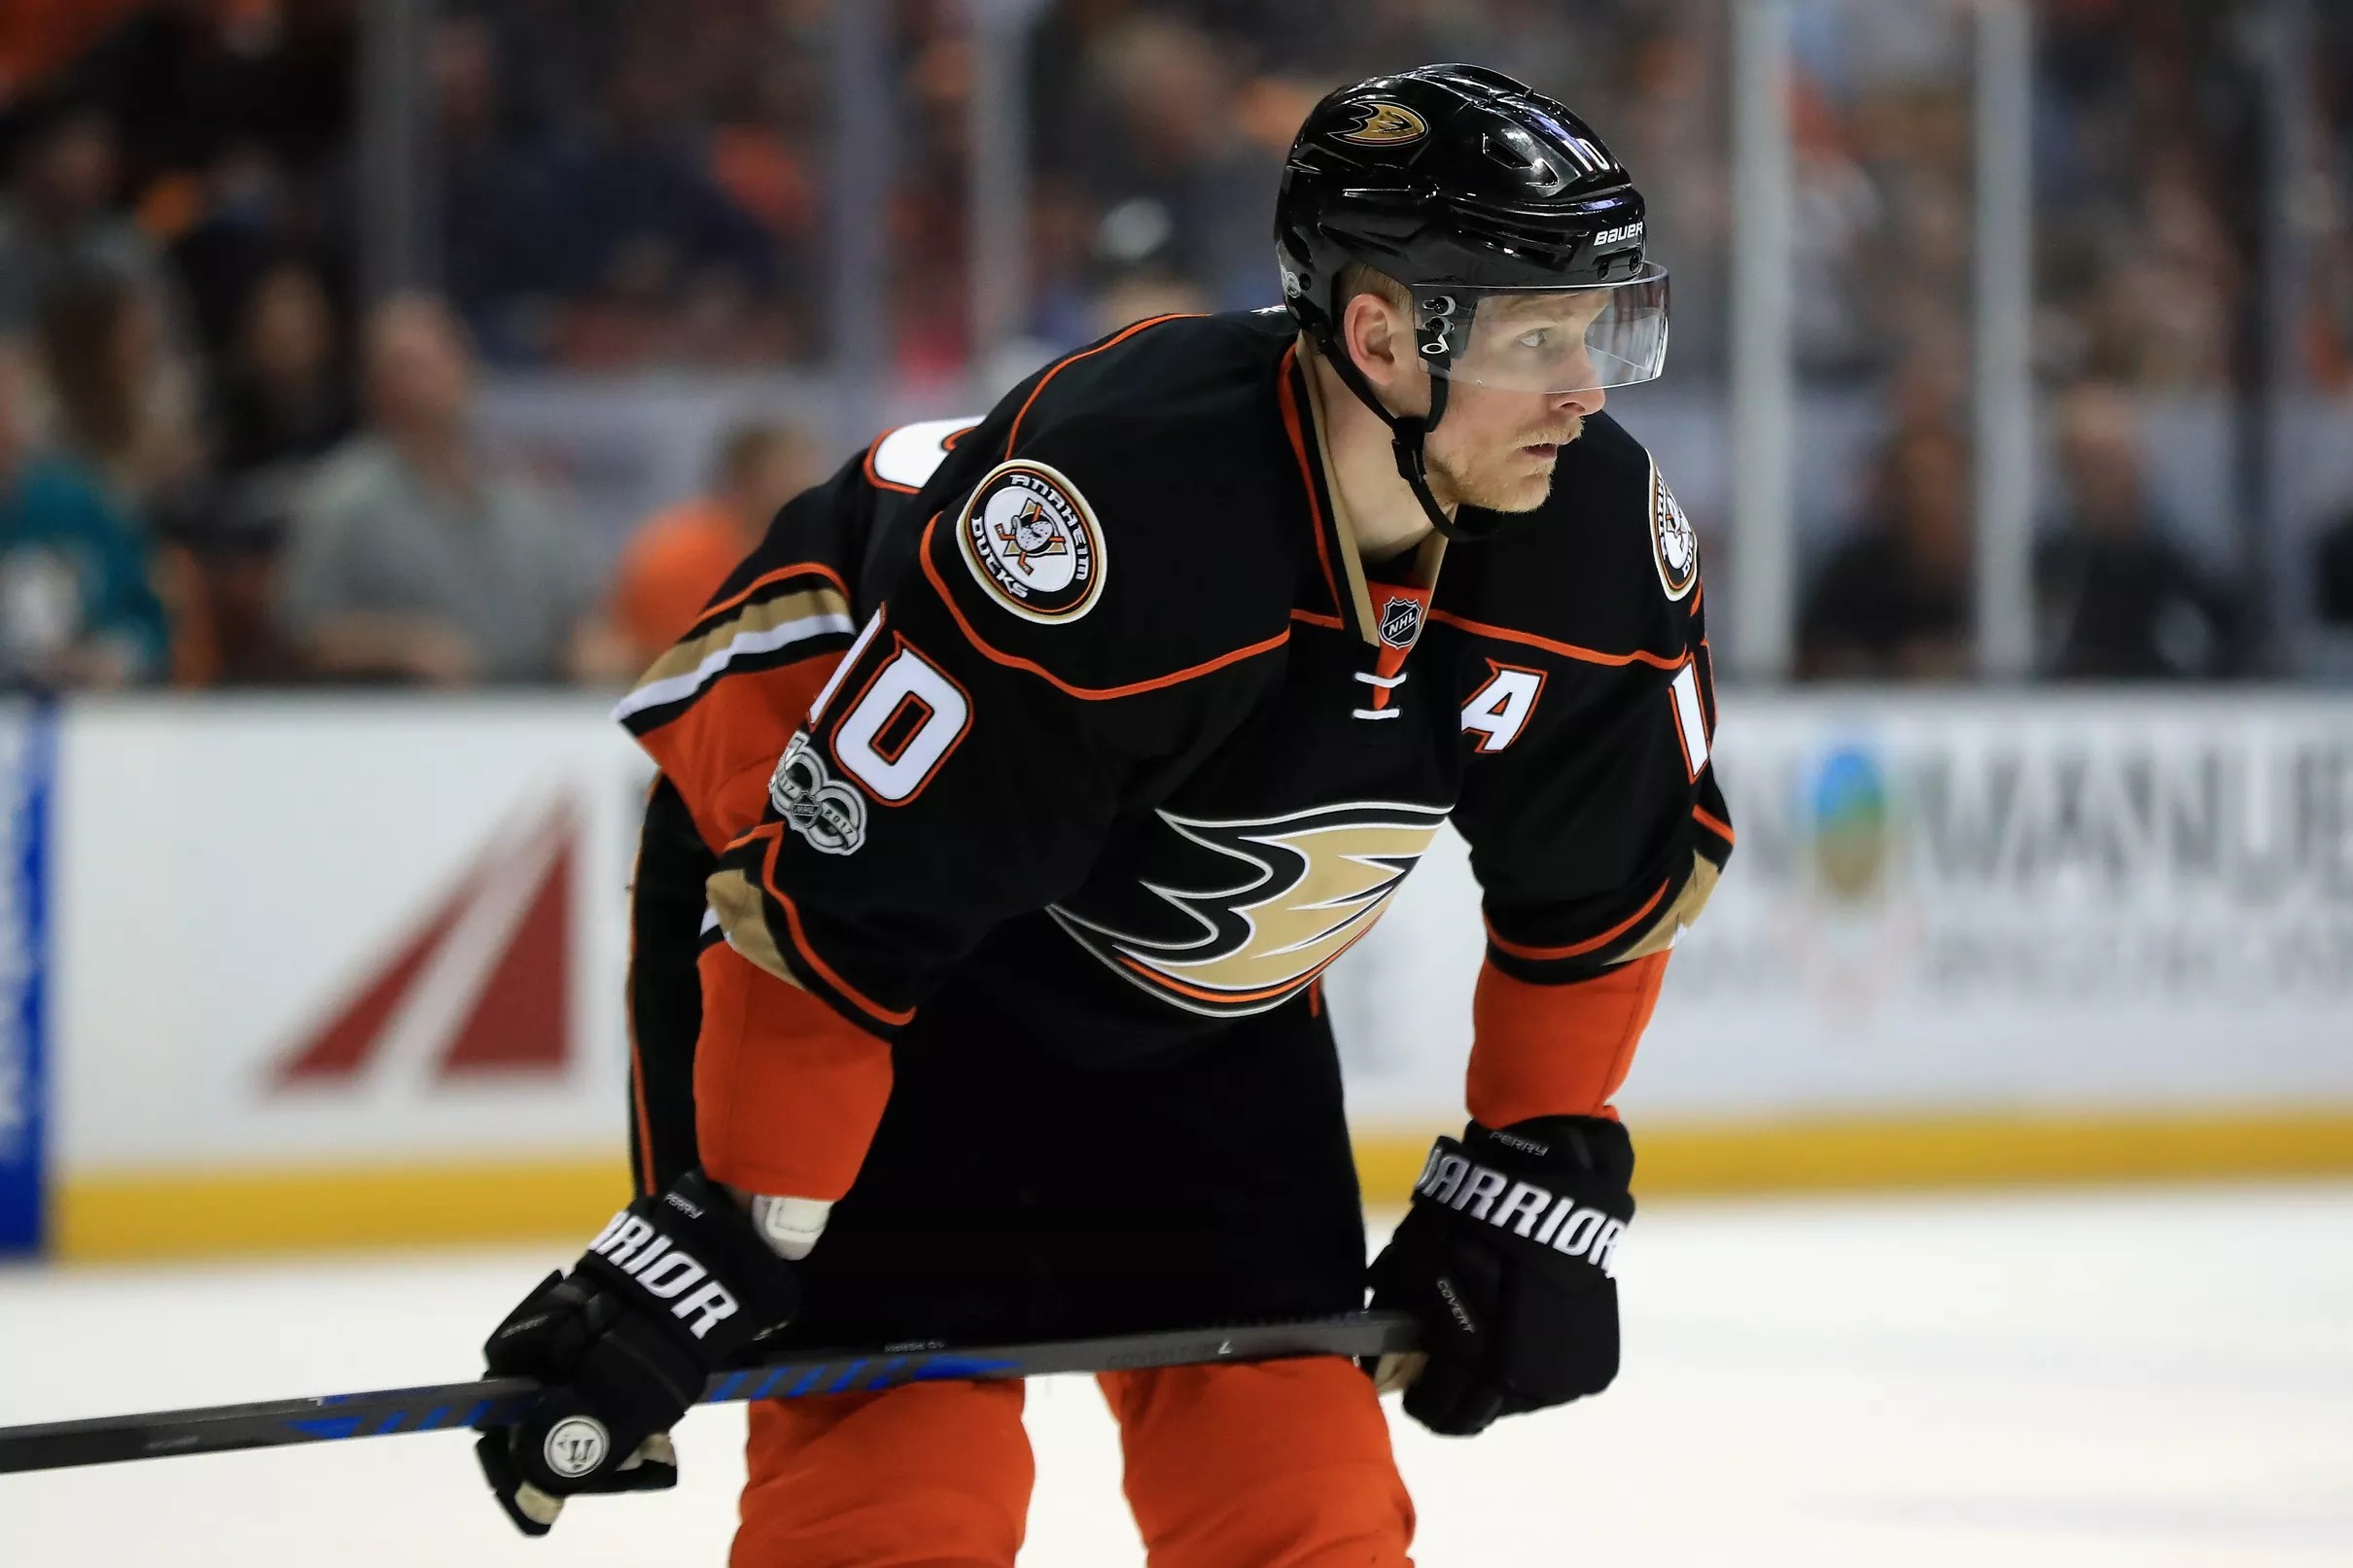 REPORT Corey Perry May Have Played Most Of The Season With A Sprained MCL